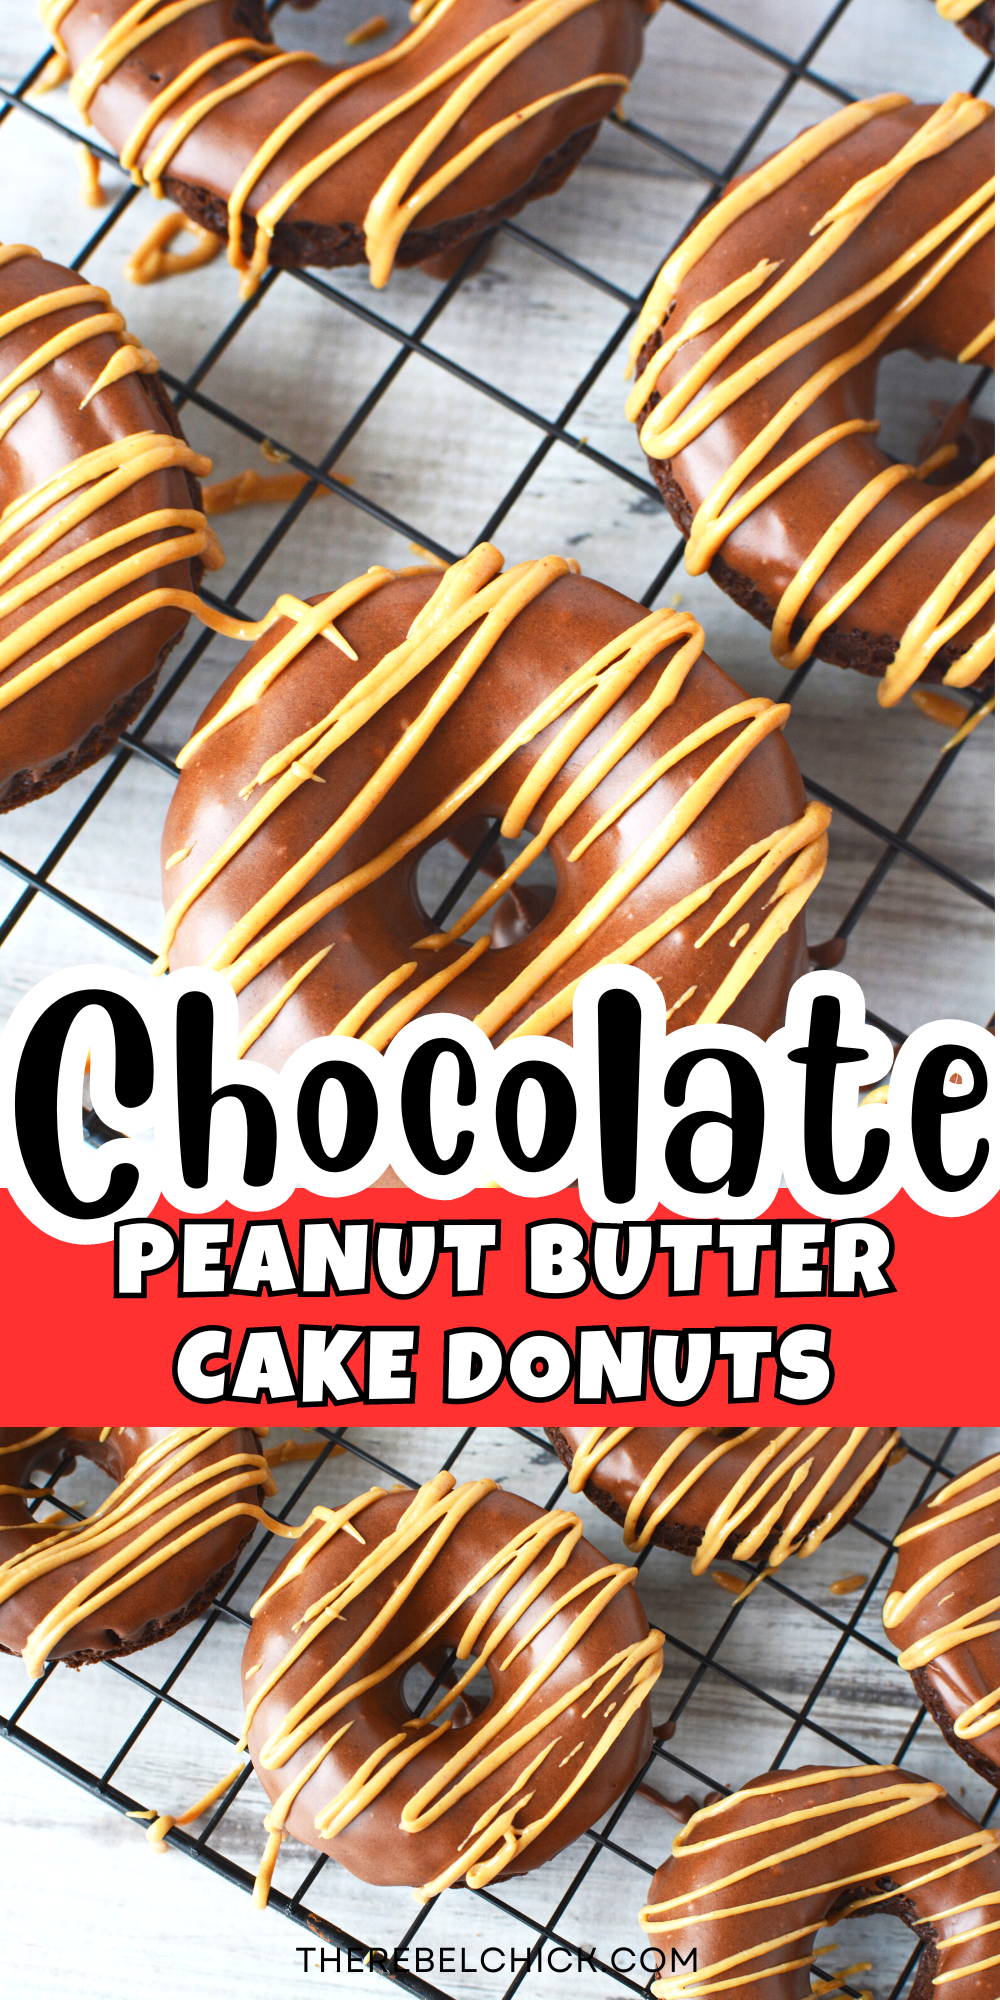 Chocolate Peanut Butter Cake Donuts